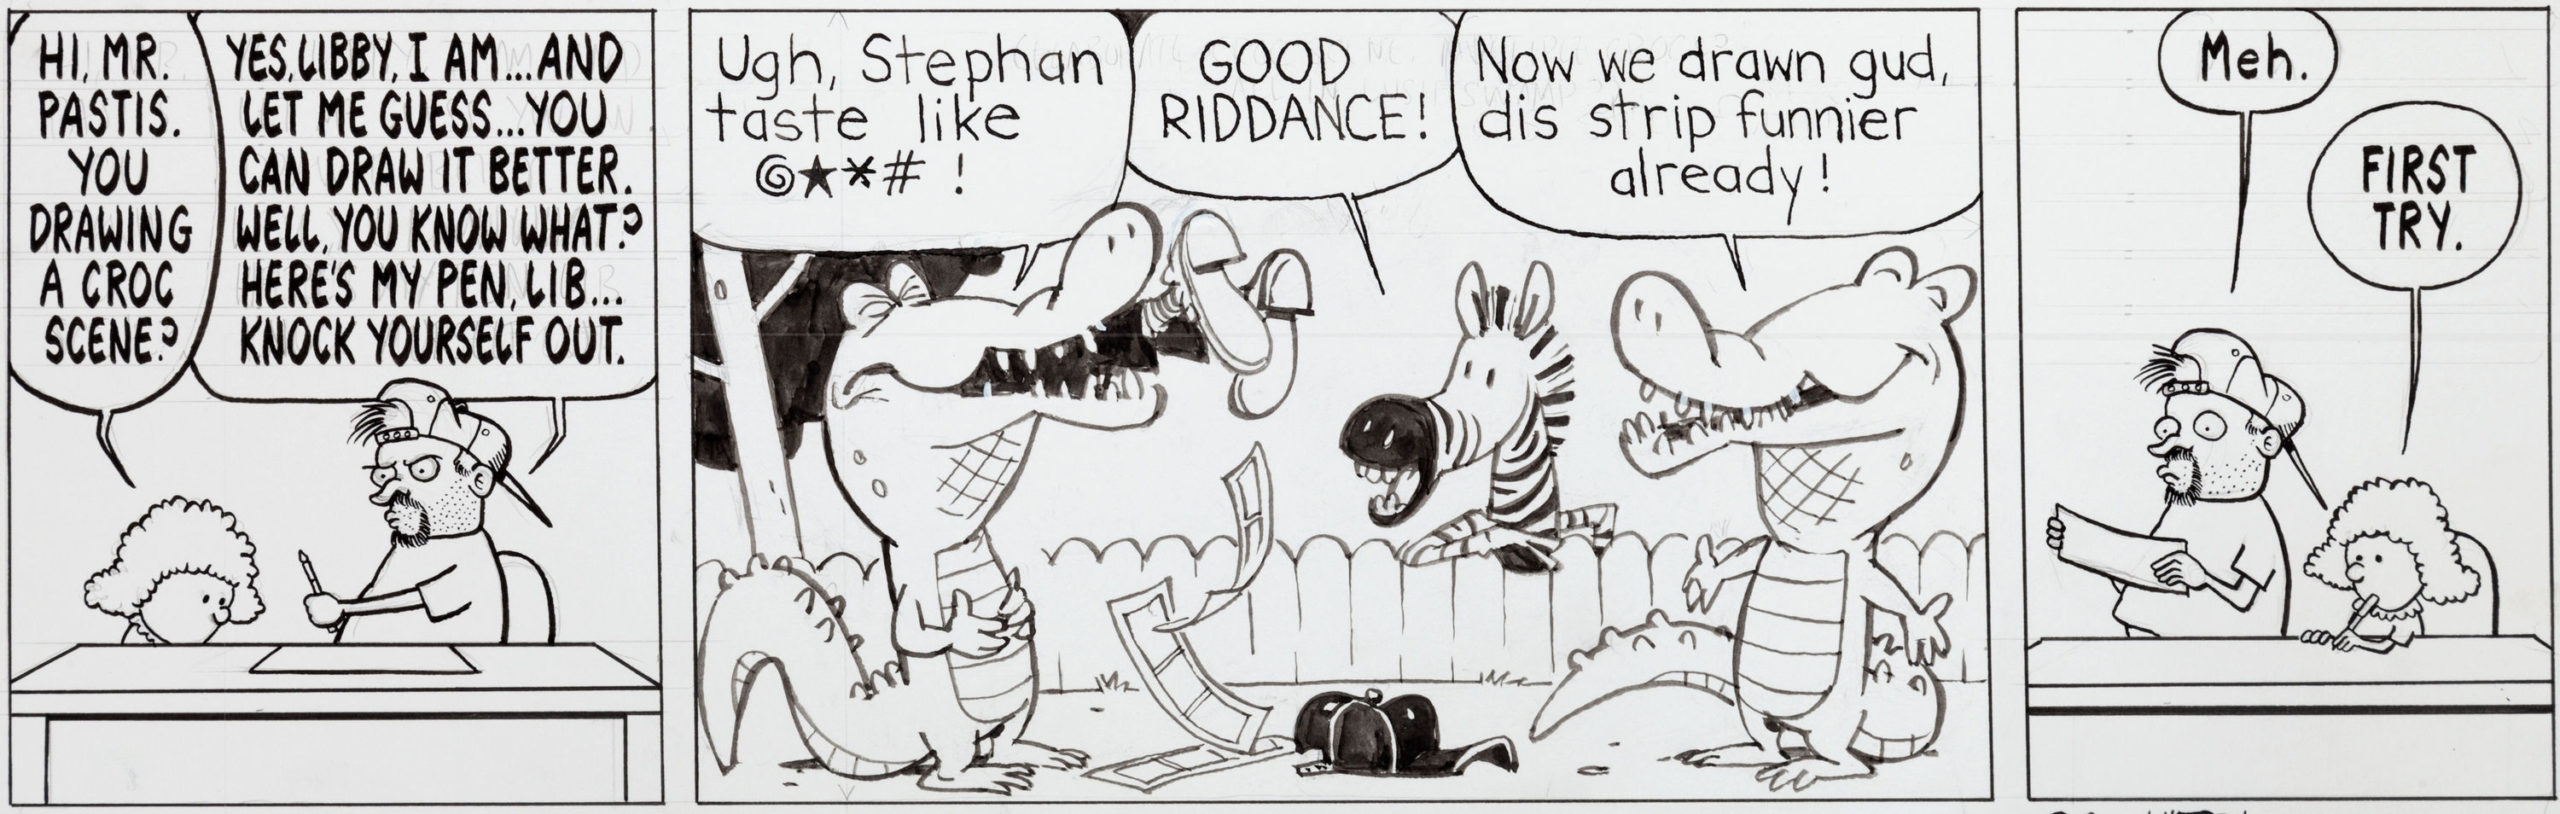 Calvin And Hobbes Creator’s New Comic Strips Are Now For Sale